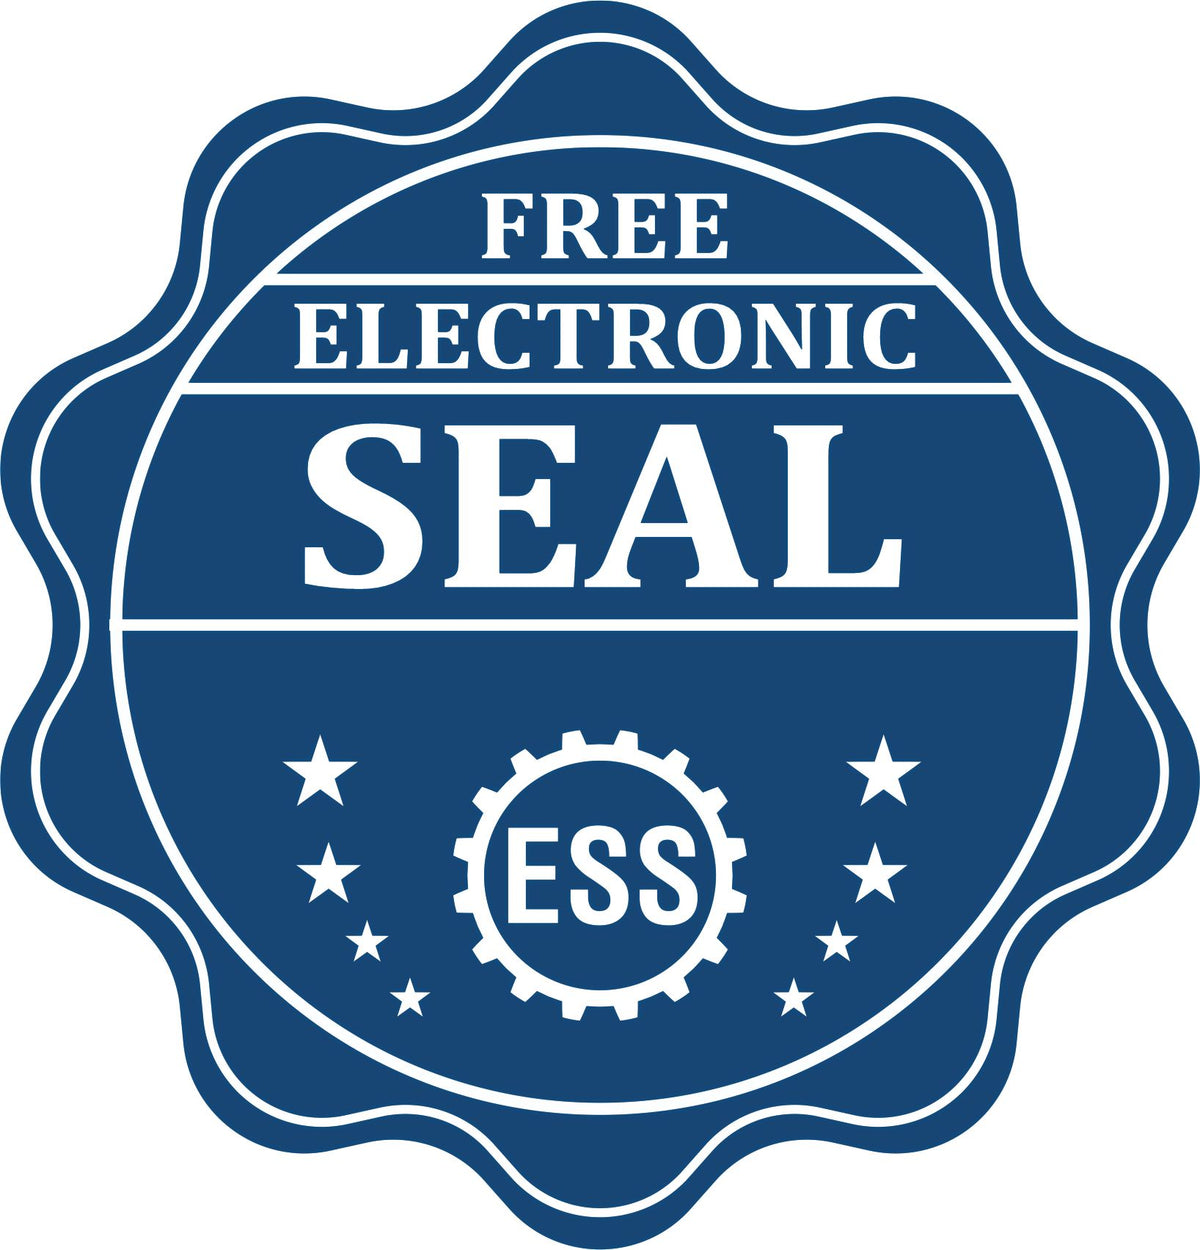 A badge showing a free electronic seal for the Handheld New Hampshire Professional Geologist Embosser with stars and the ESS gear on the emblem.